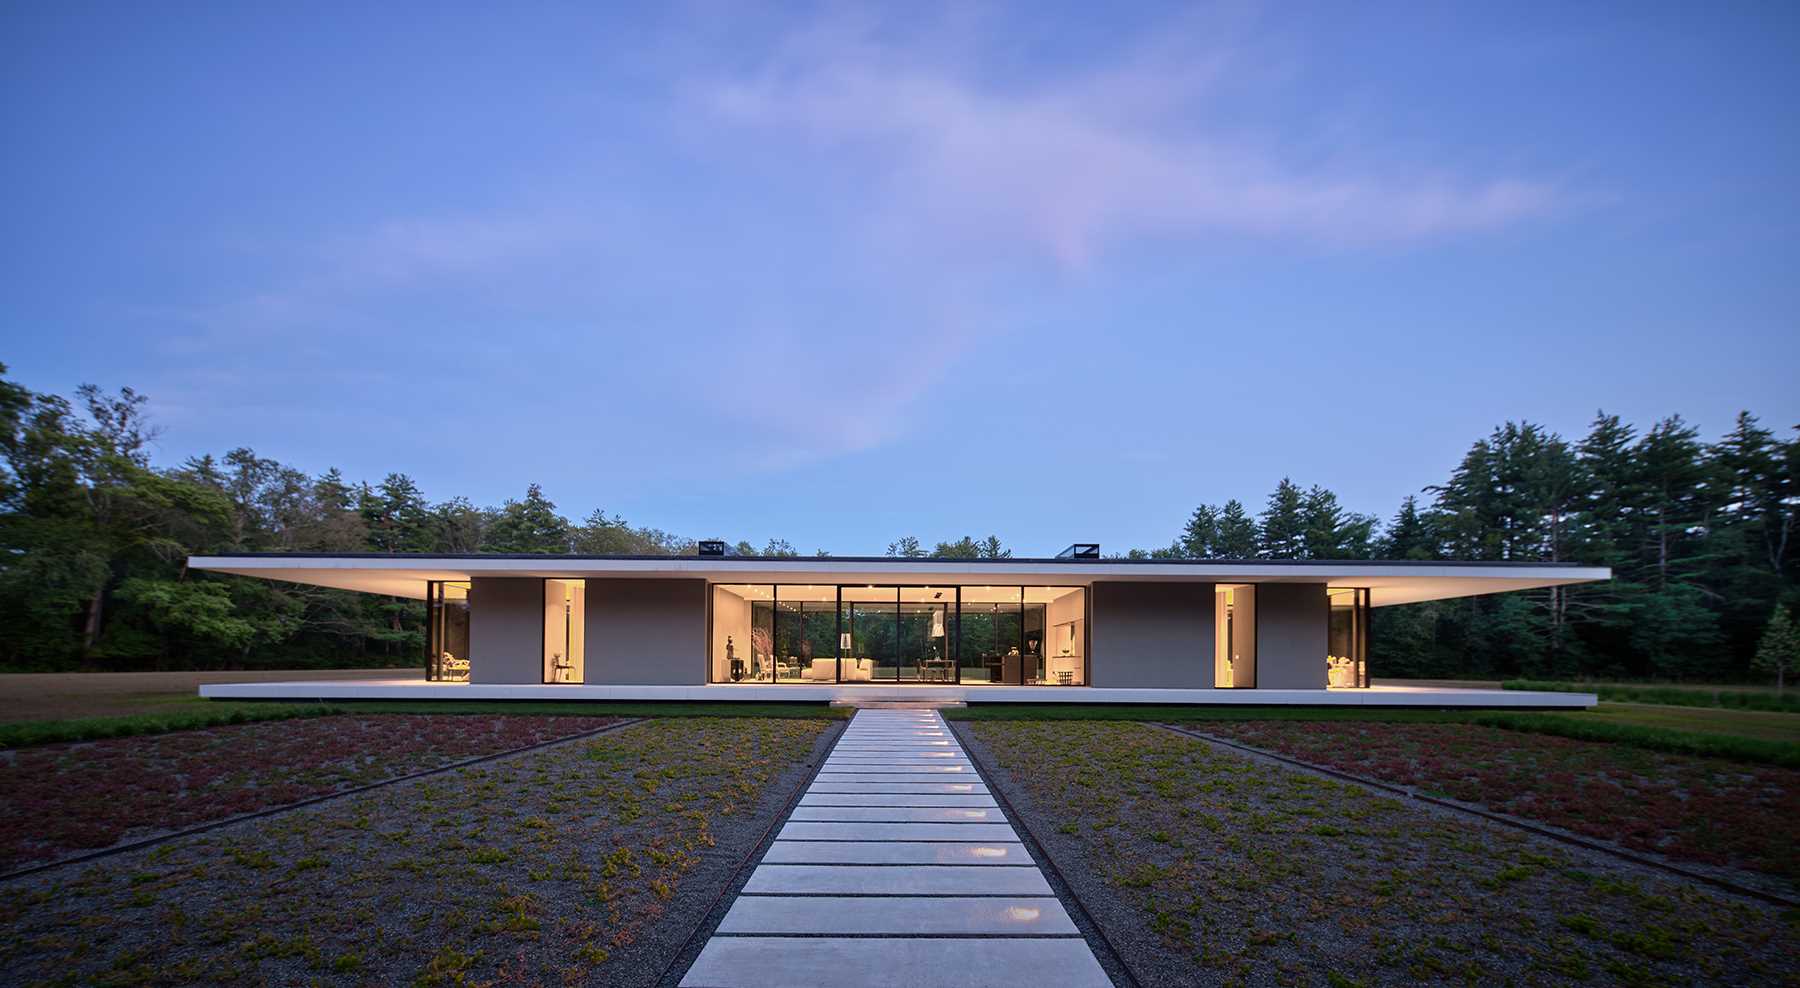 A modern single-storey home with a thin floating roof that cantilevers 15 feet.